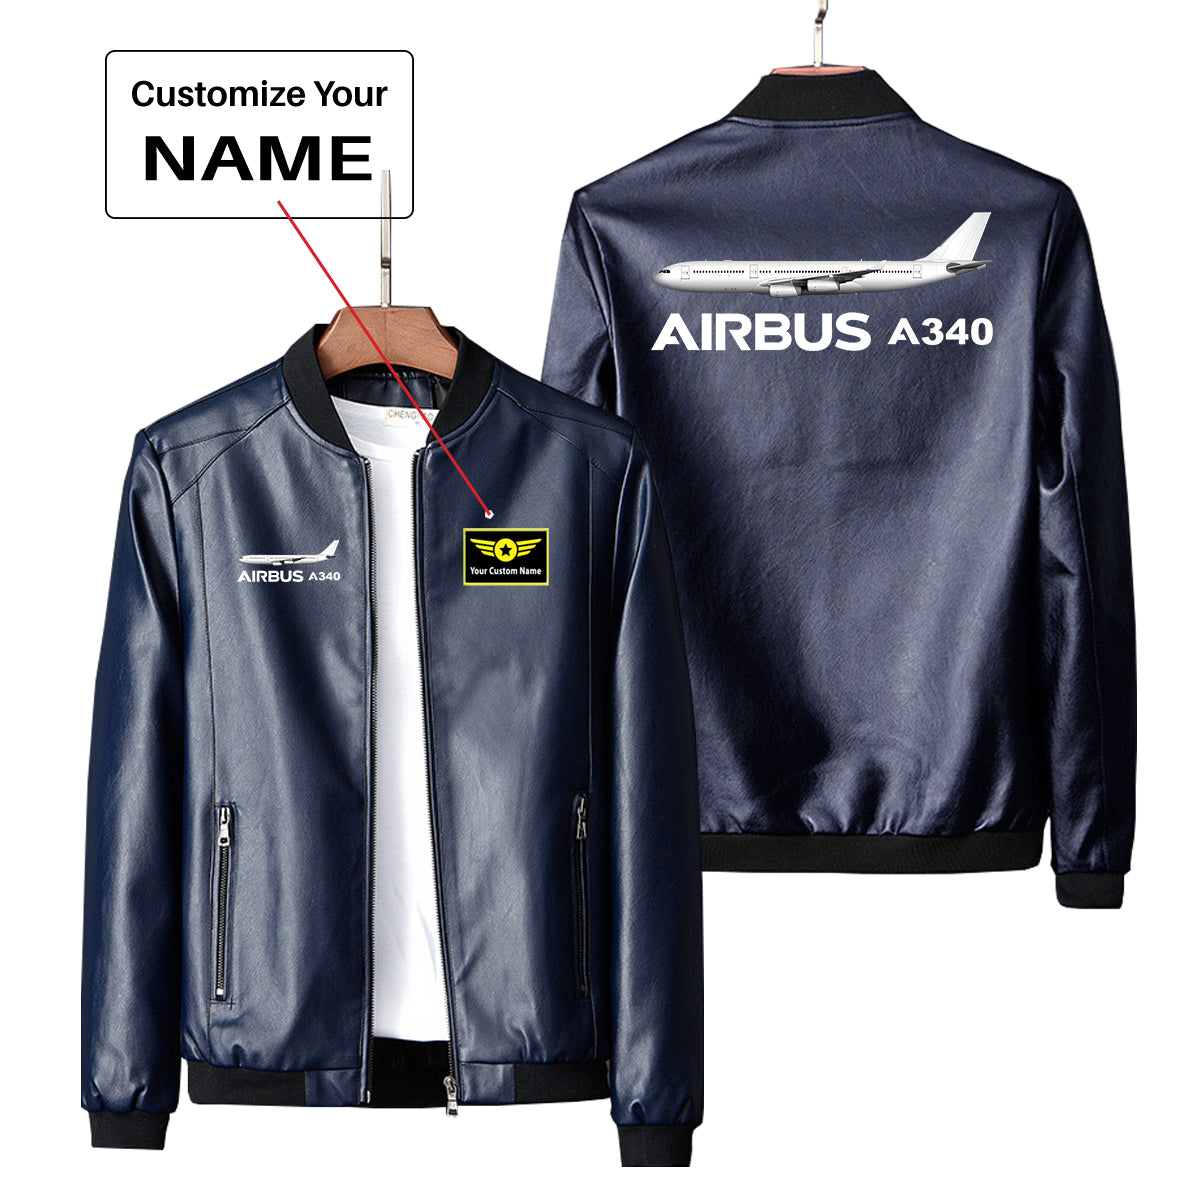 The Airbus A340 Designed PU Leather Jackets